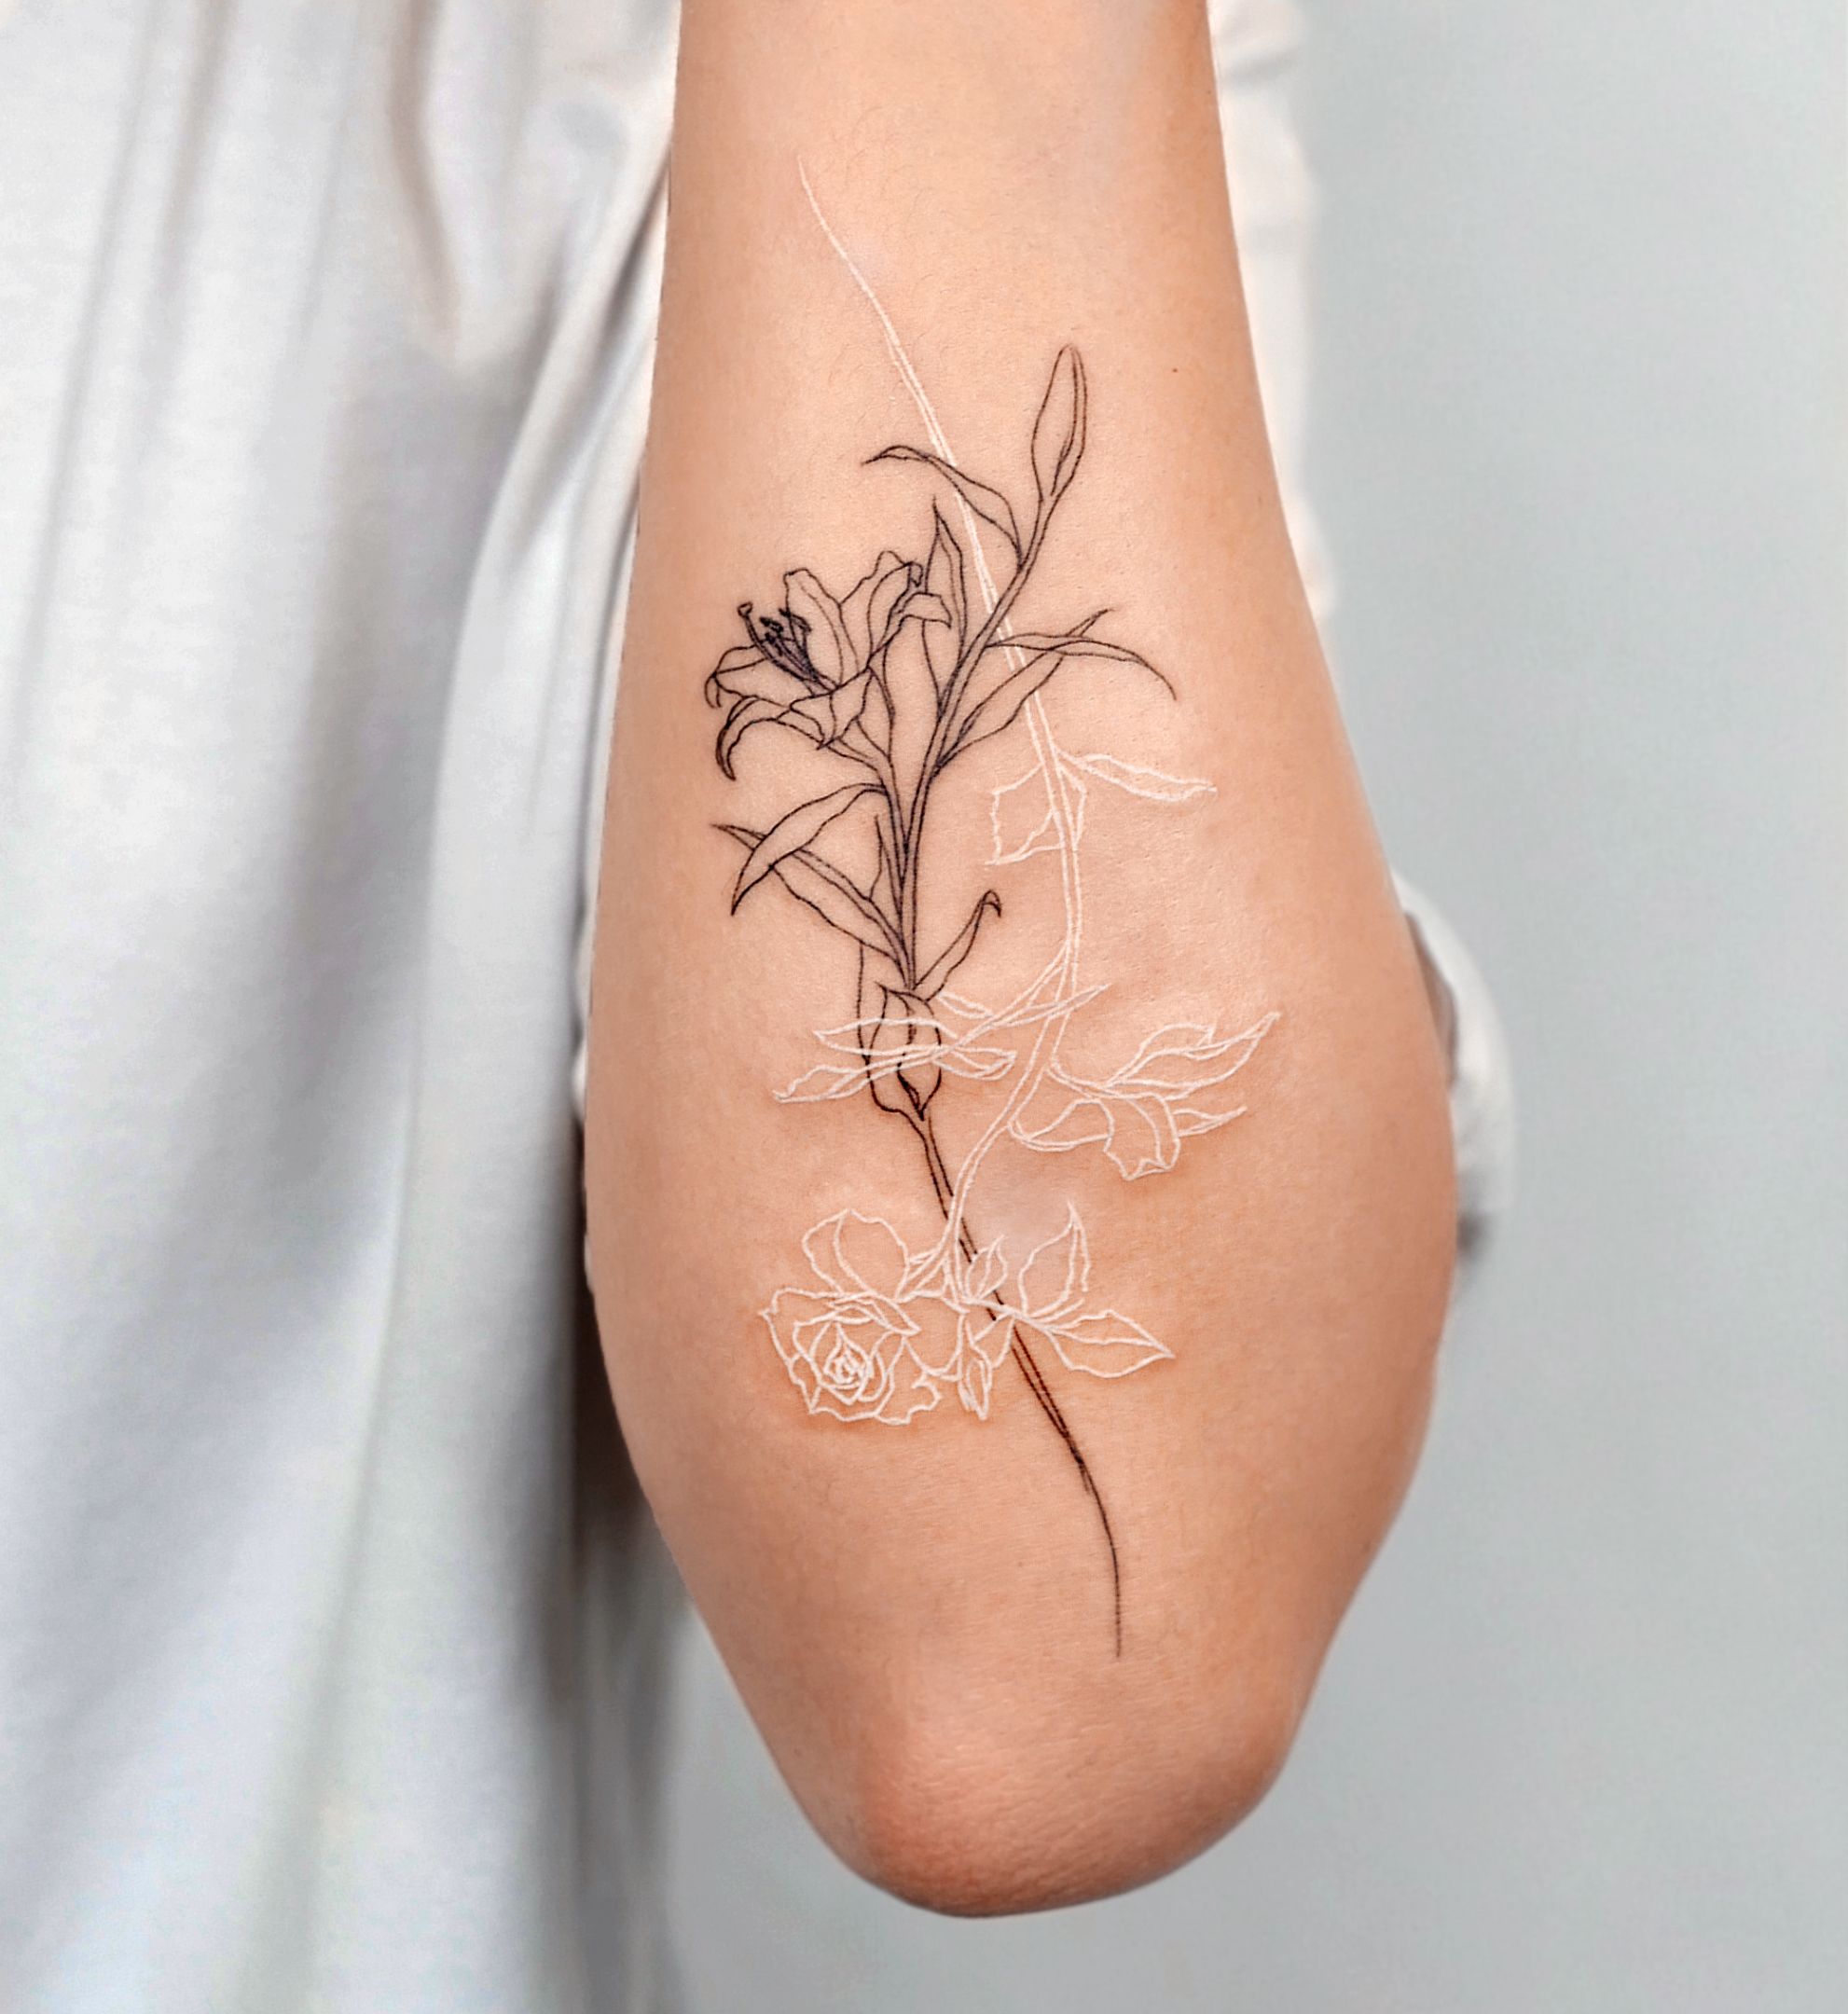 Fine line tattoo – Things&Ink